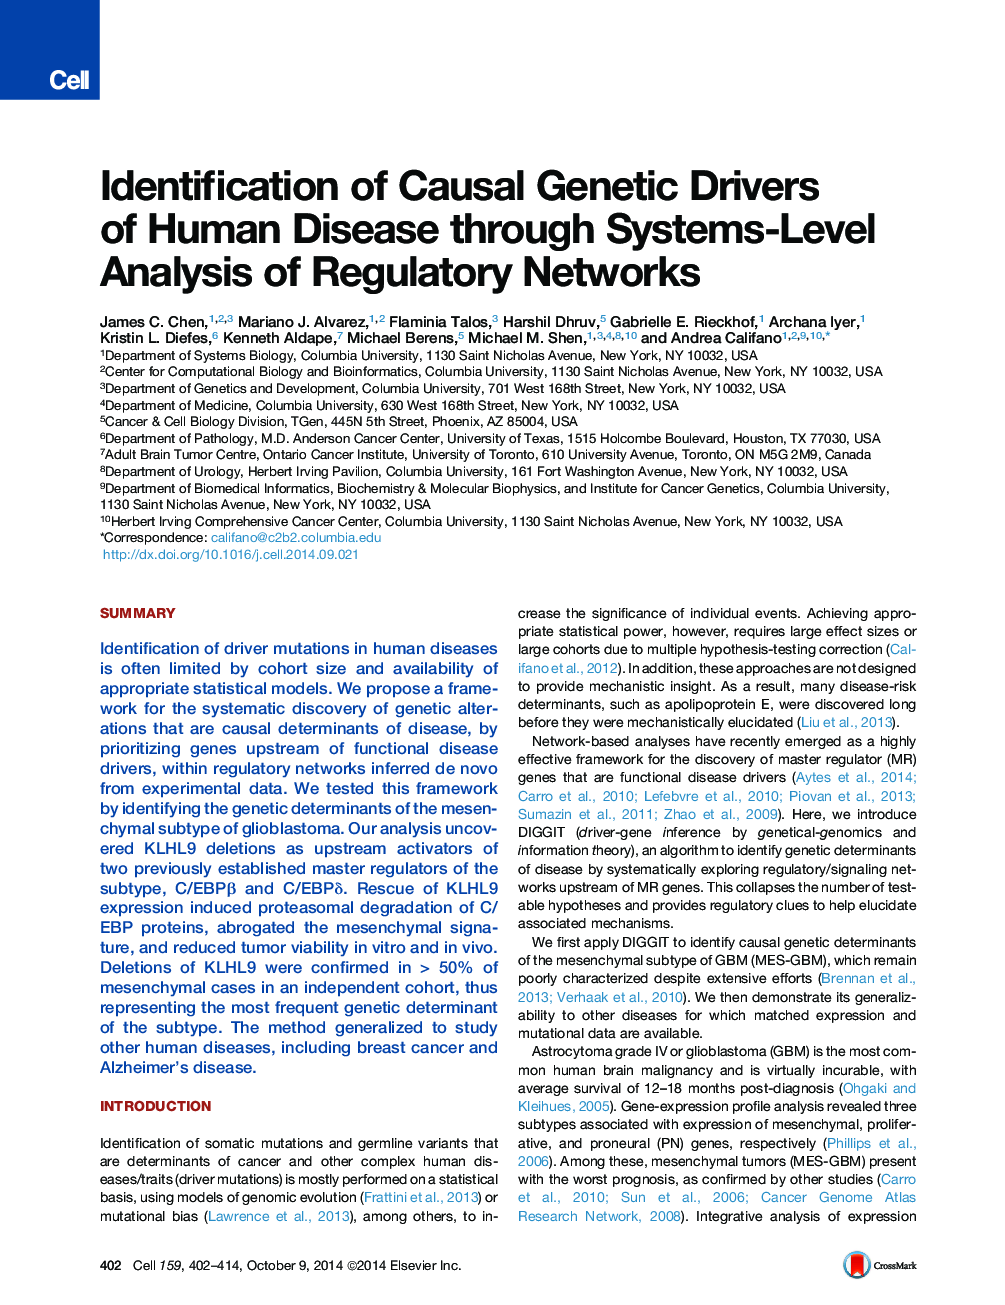 Identification of Causal Genetic Drivers of Human Disease through Systems-Level Analysis of Regulatory Networks